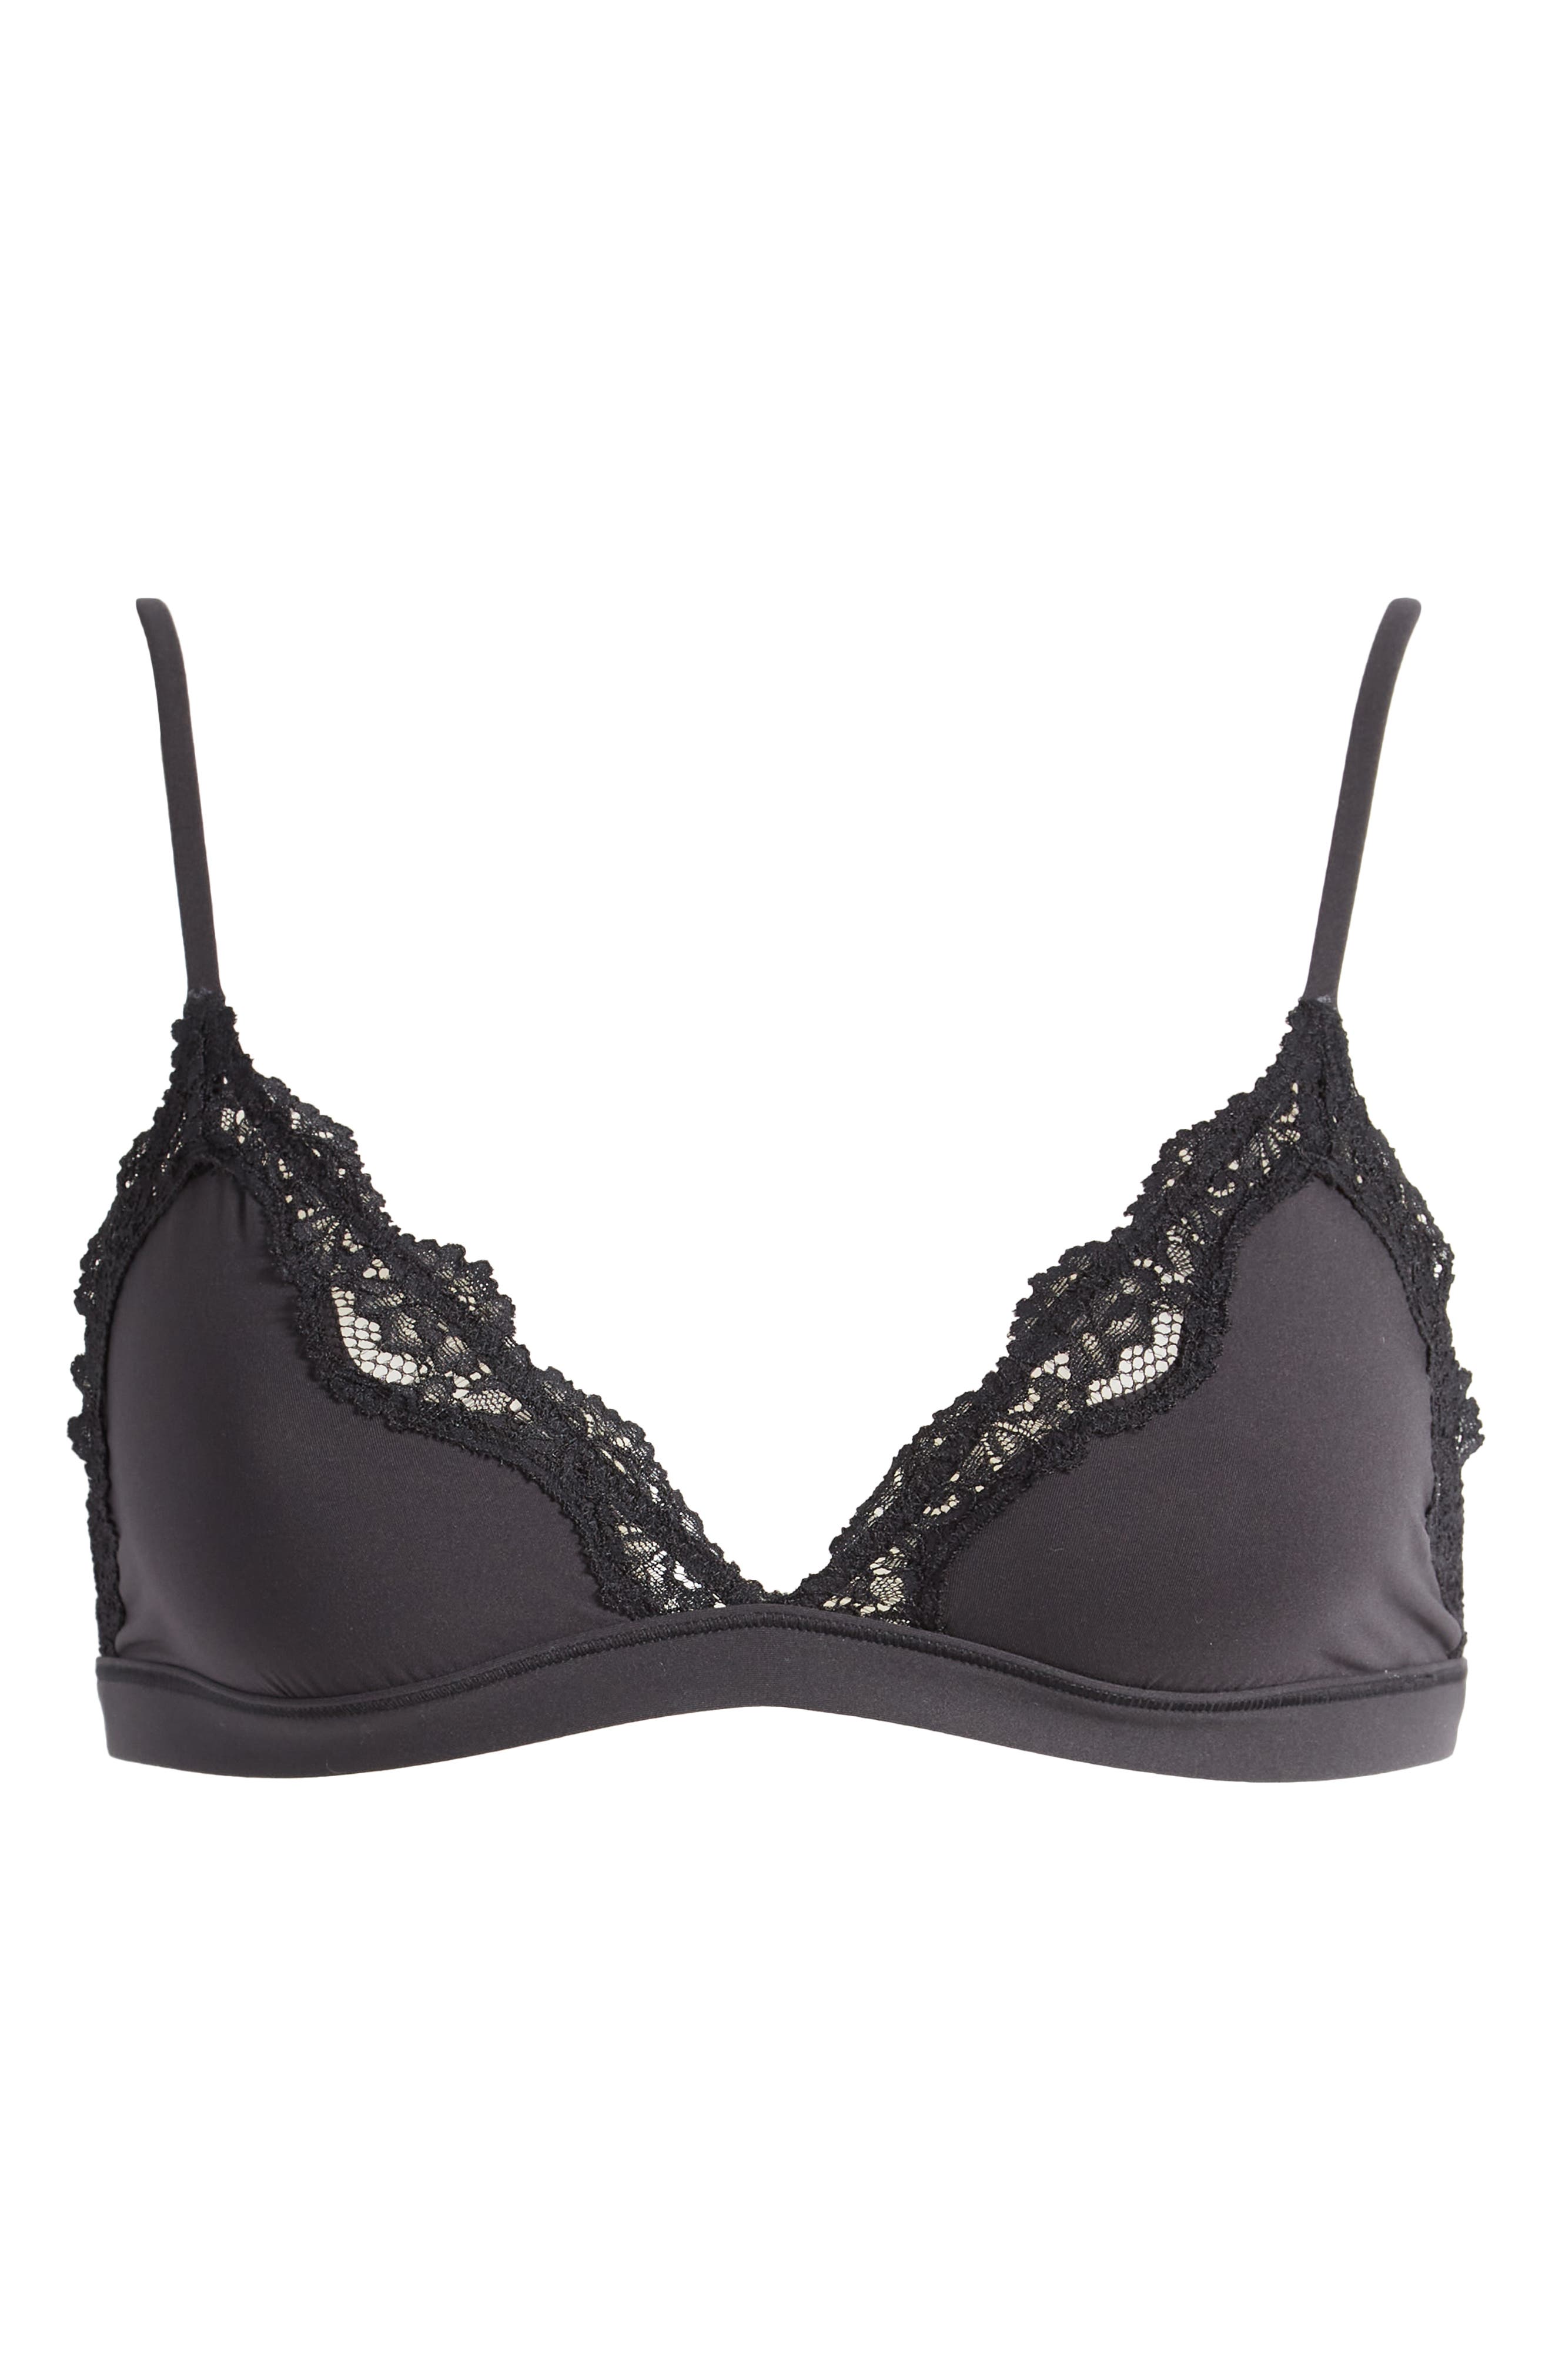 Fits Everybody Lace Triangle Bralette - Bronze